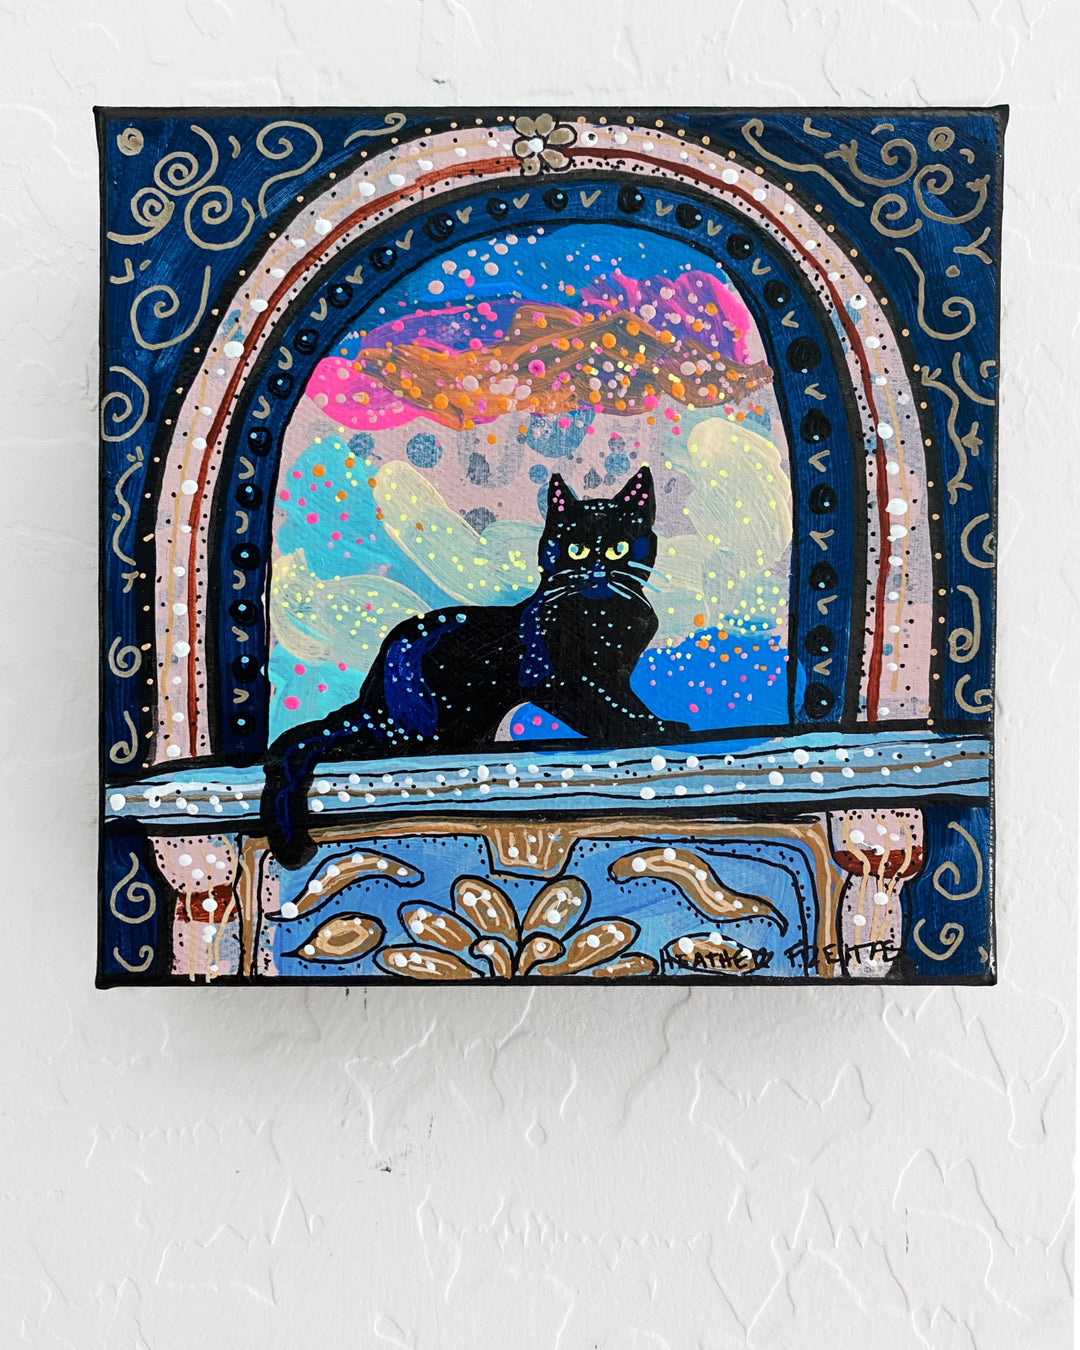 Royal Black Cat In Archway( Original Painting )